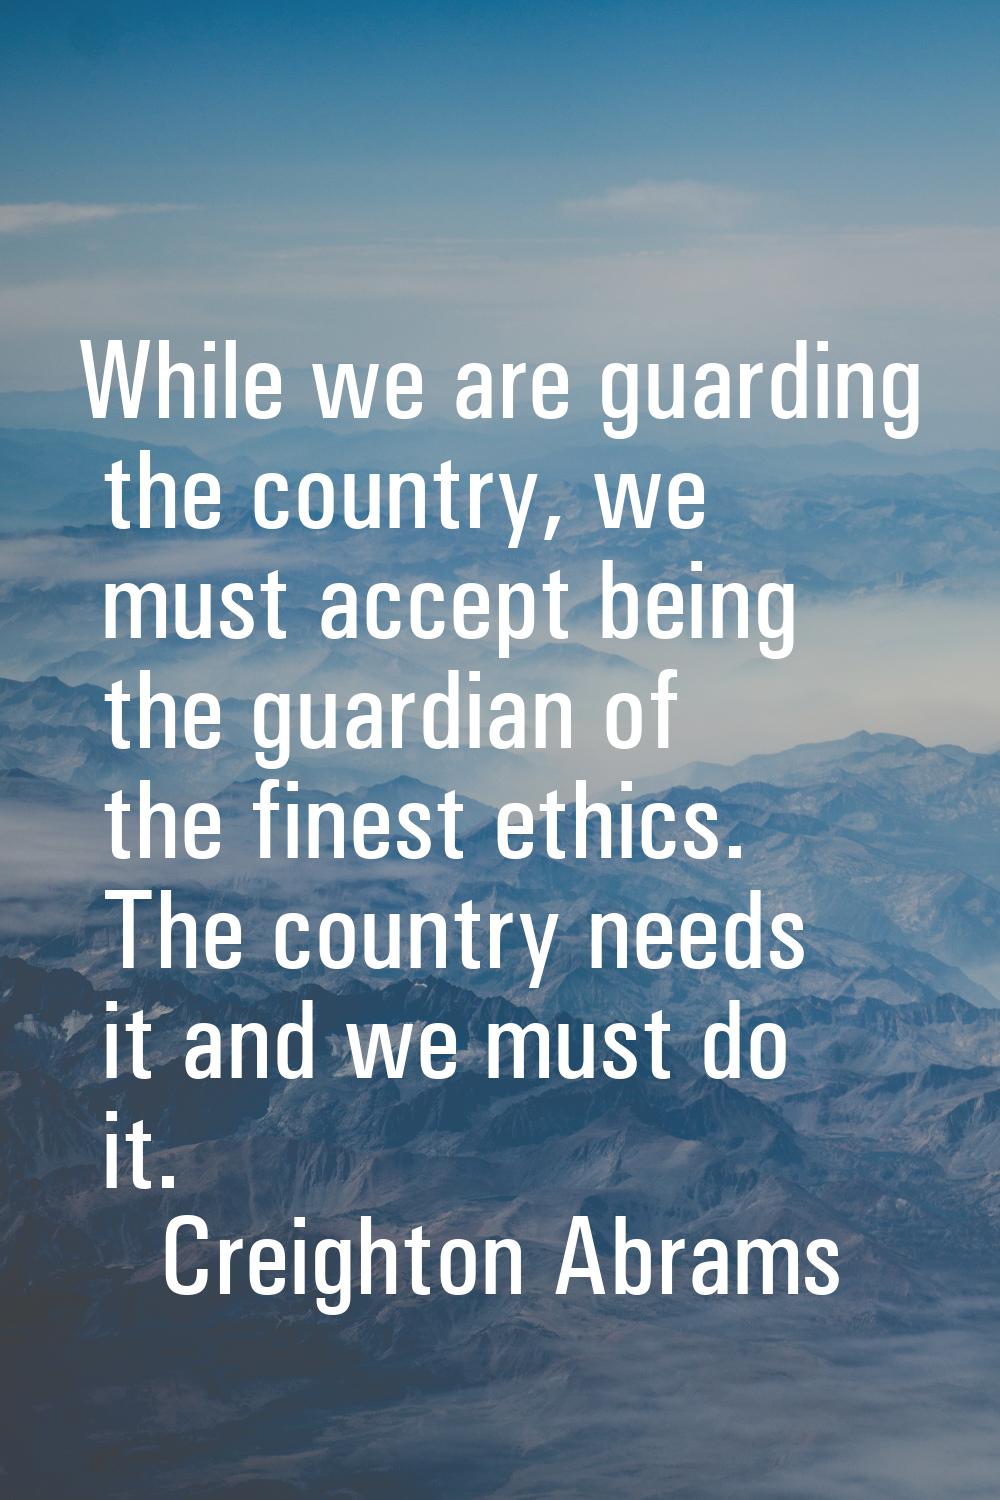 While we are guarding the country, we must accept being the guardian of the finest ethics. The coun